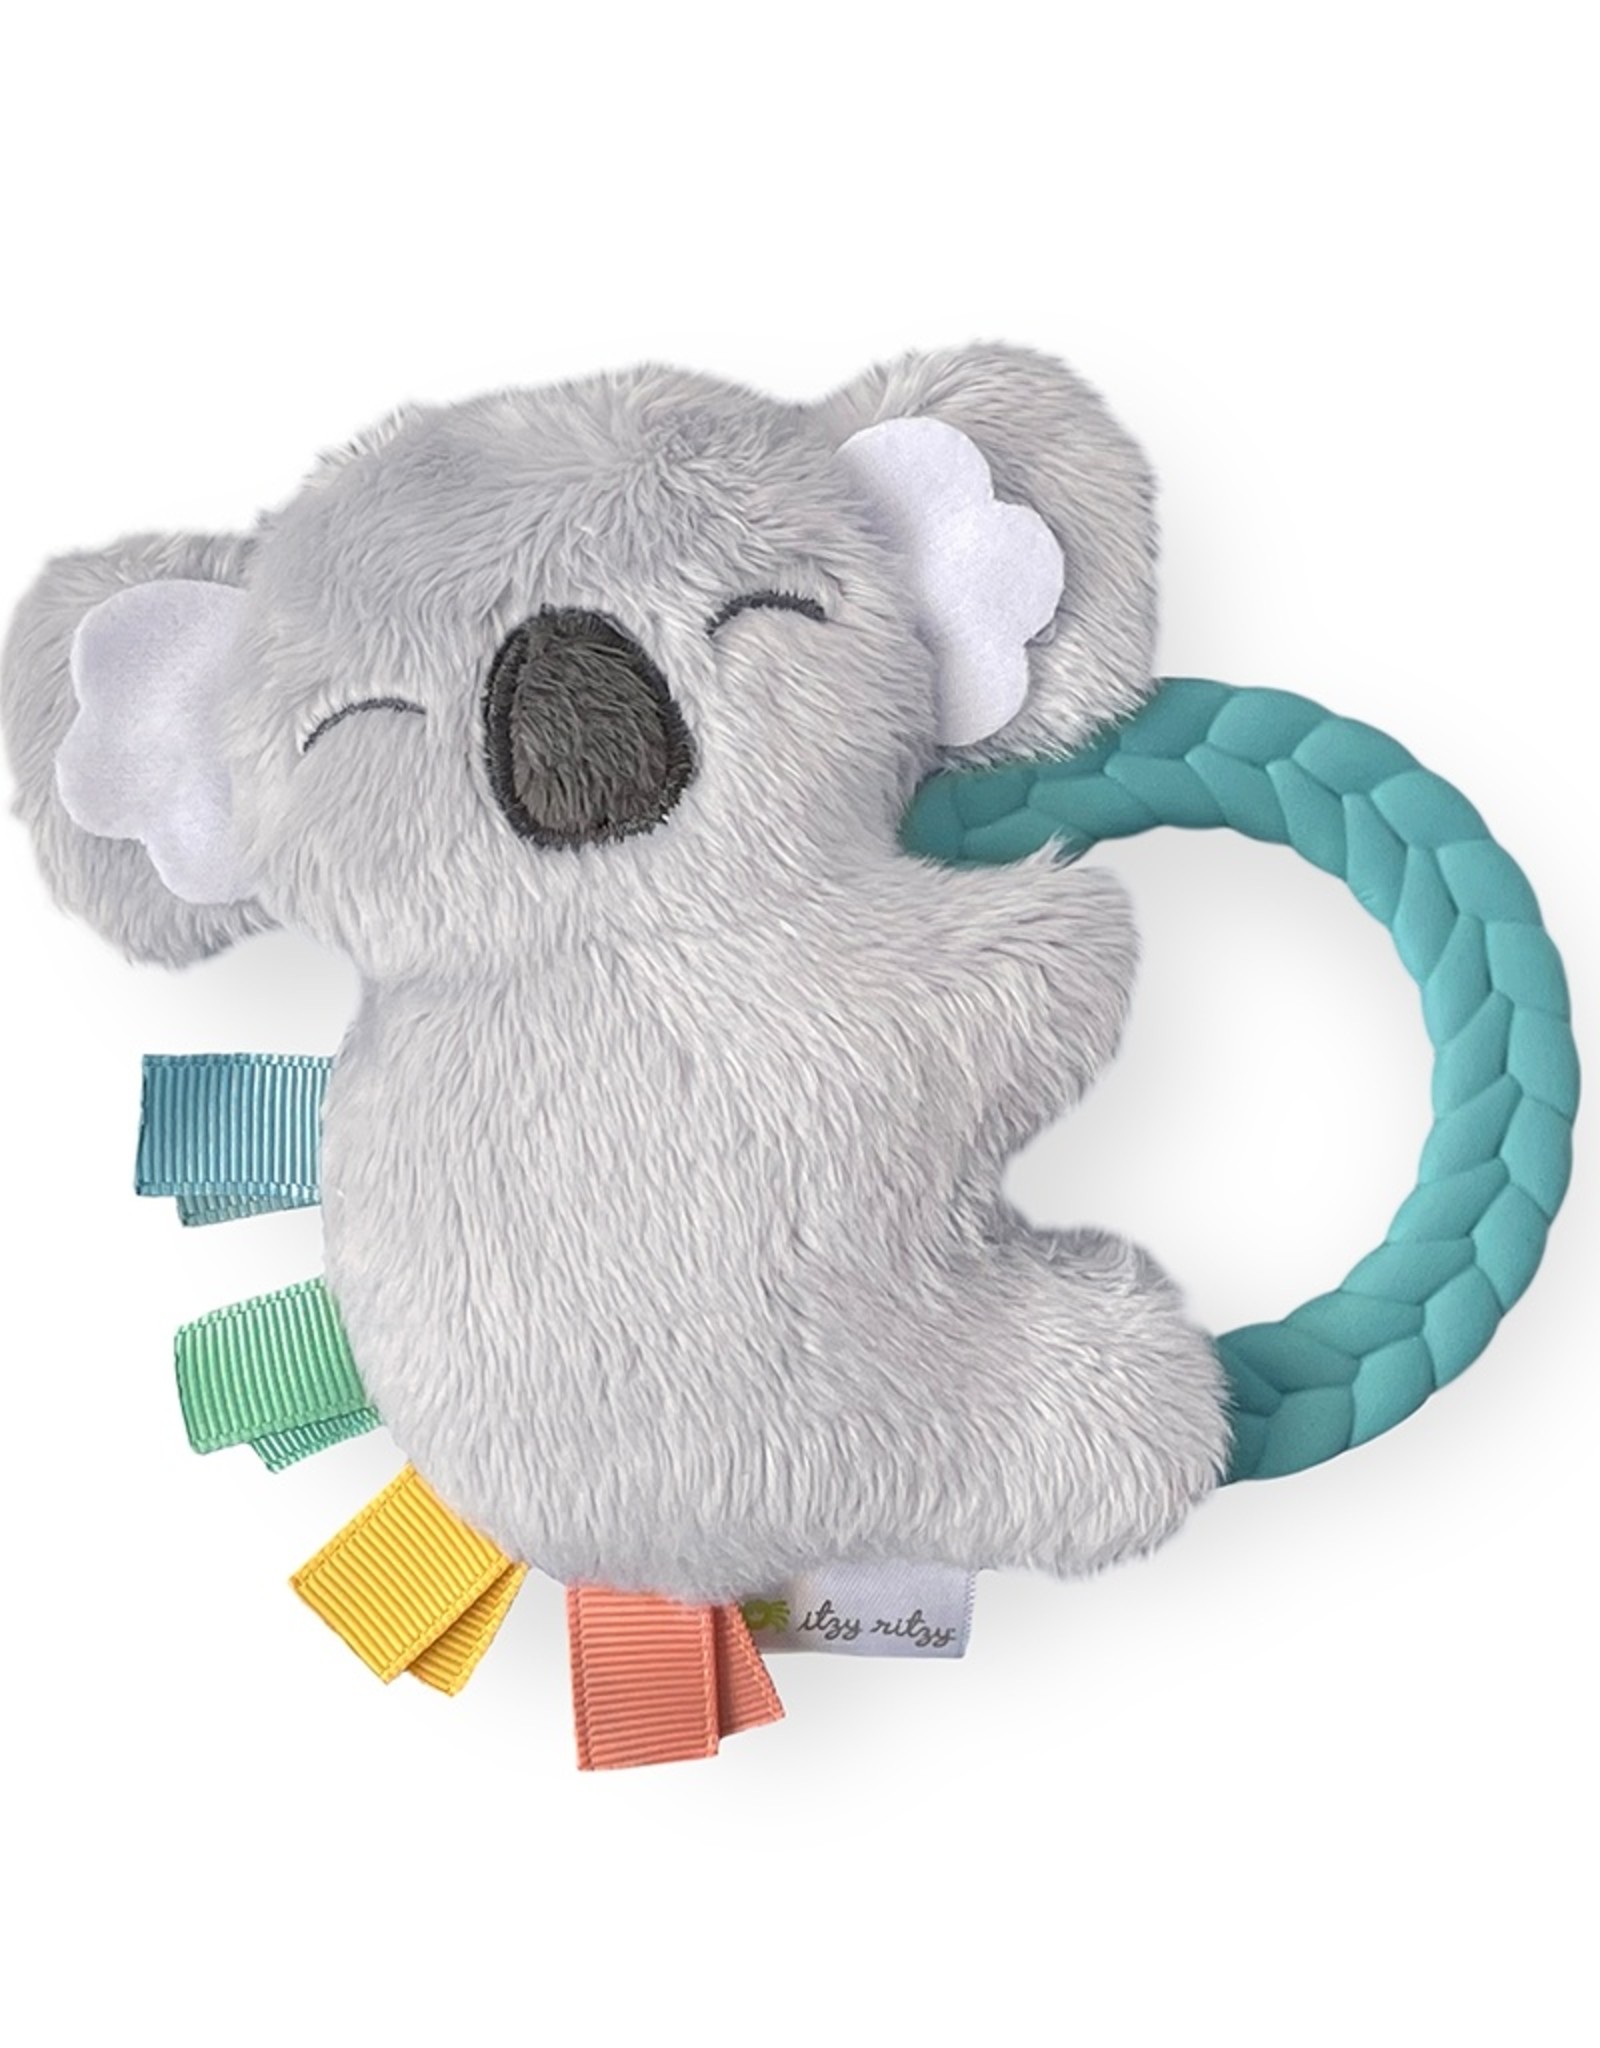 Itzy Ritzy Ritzy Rattle Pal Plush with Teether